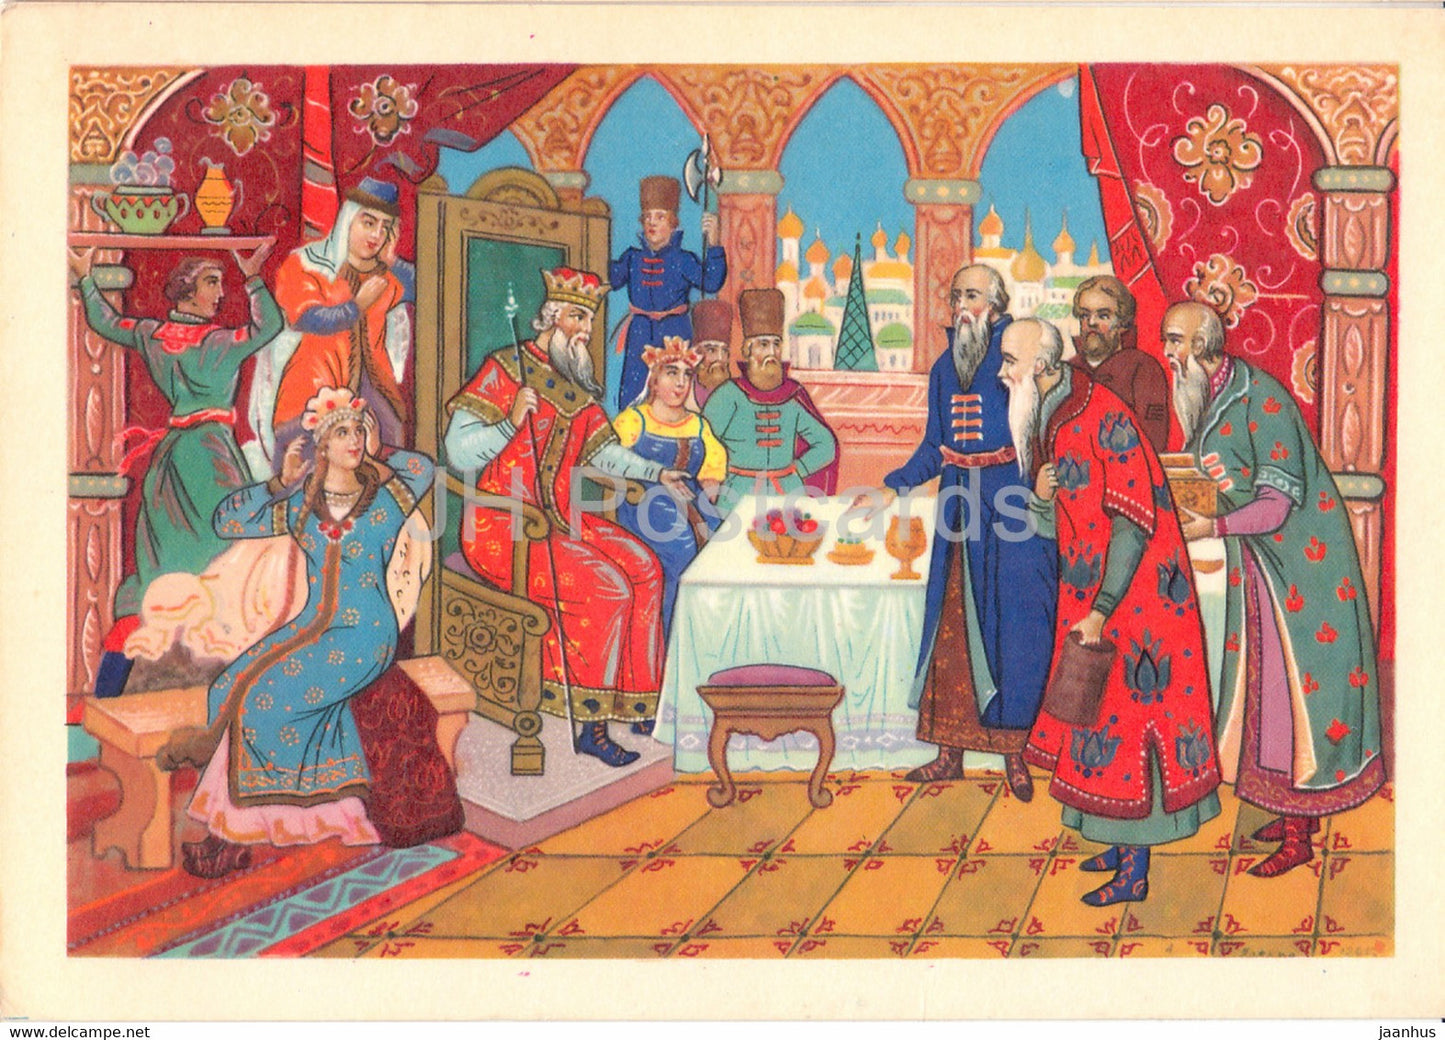 The Tale of Tsar Saltan by A. Pushkin - visitors - Fairy Tale - 1966 - Russia USSR - unused - JH Postcards